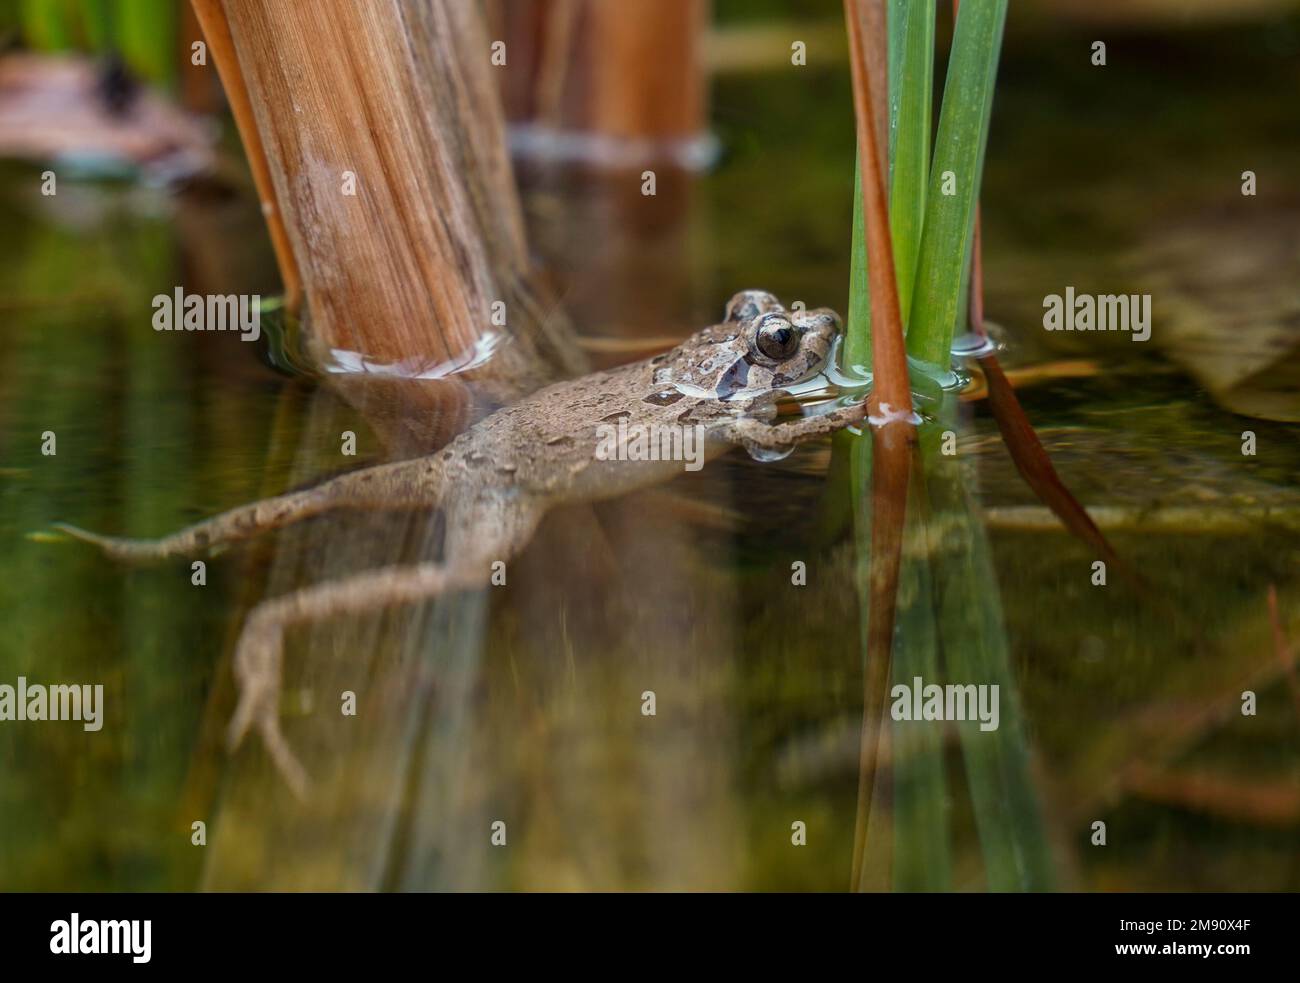 Spanish painted frog (Discoglossus jeanneae) in a pond, Andalucia, Spain. Stock Photo